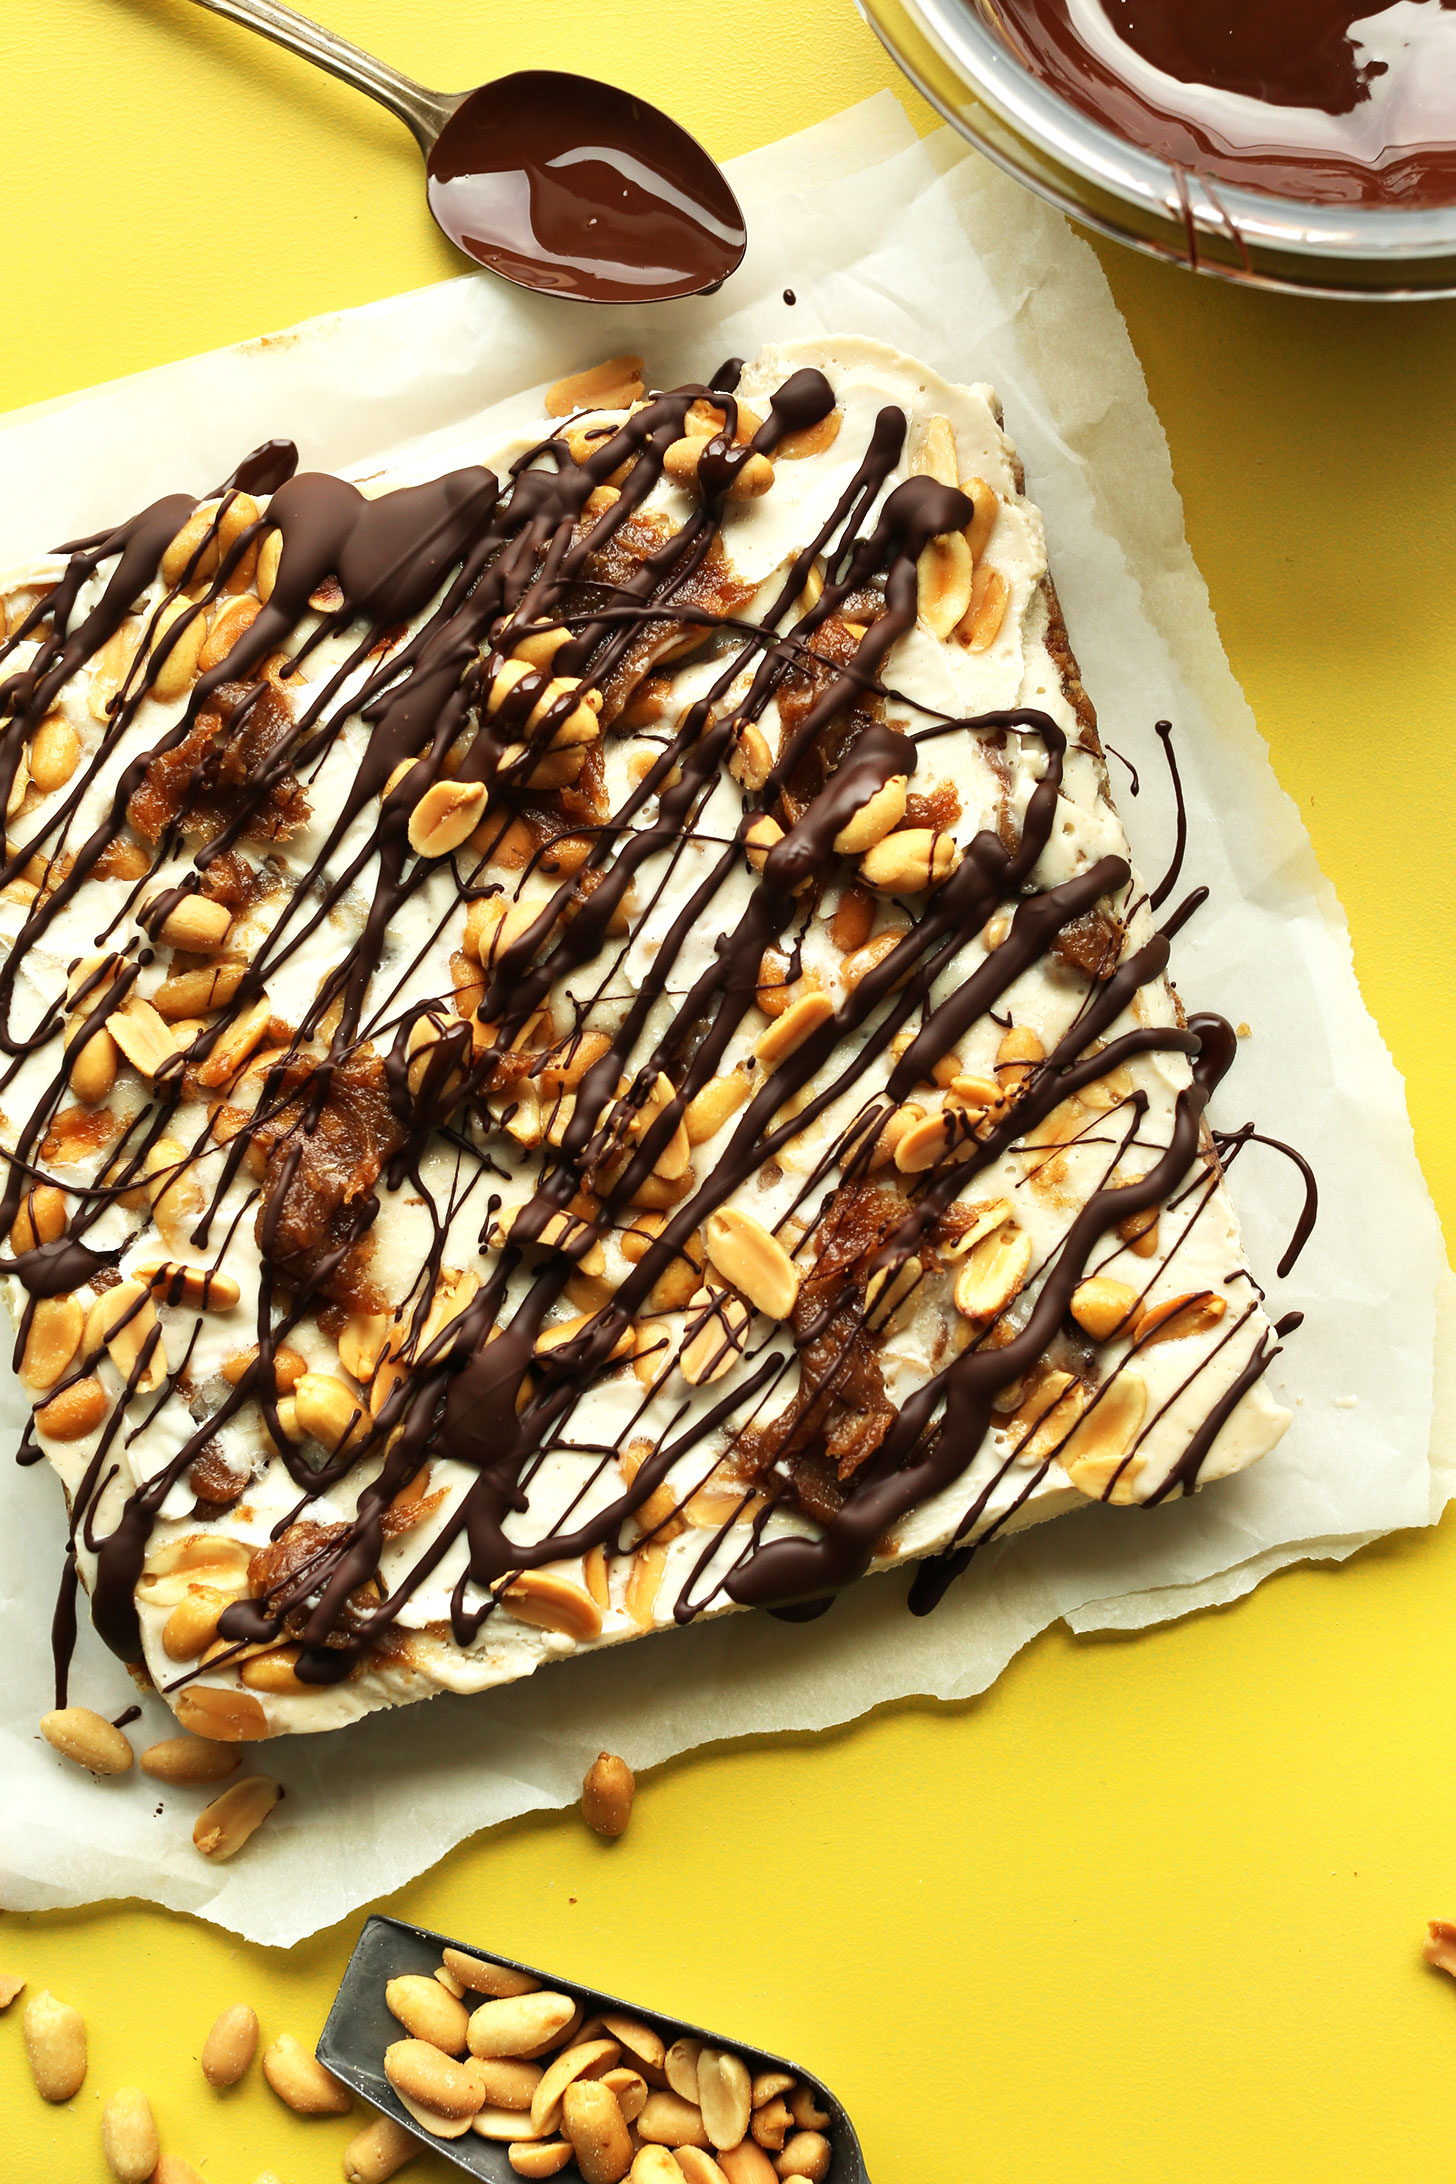 9 by 9 inch square gluten-free vegan snickers cheesecake drizzled with chocolate sauce